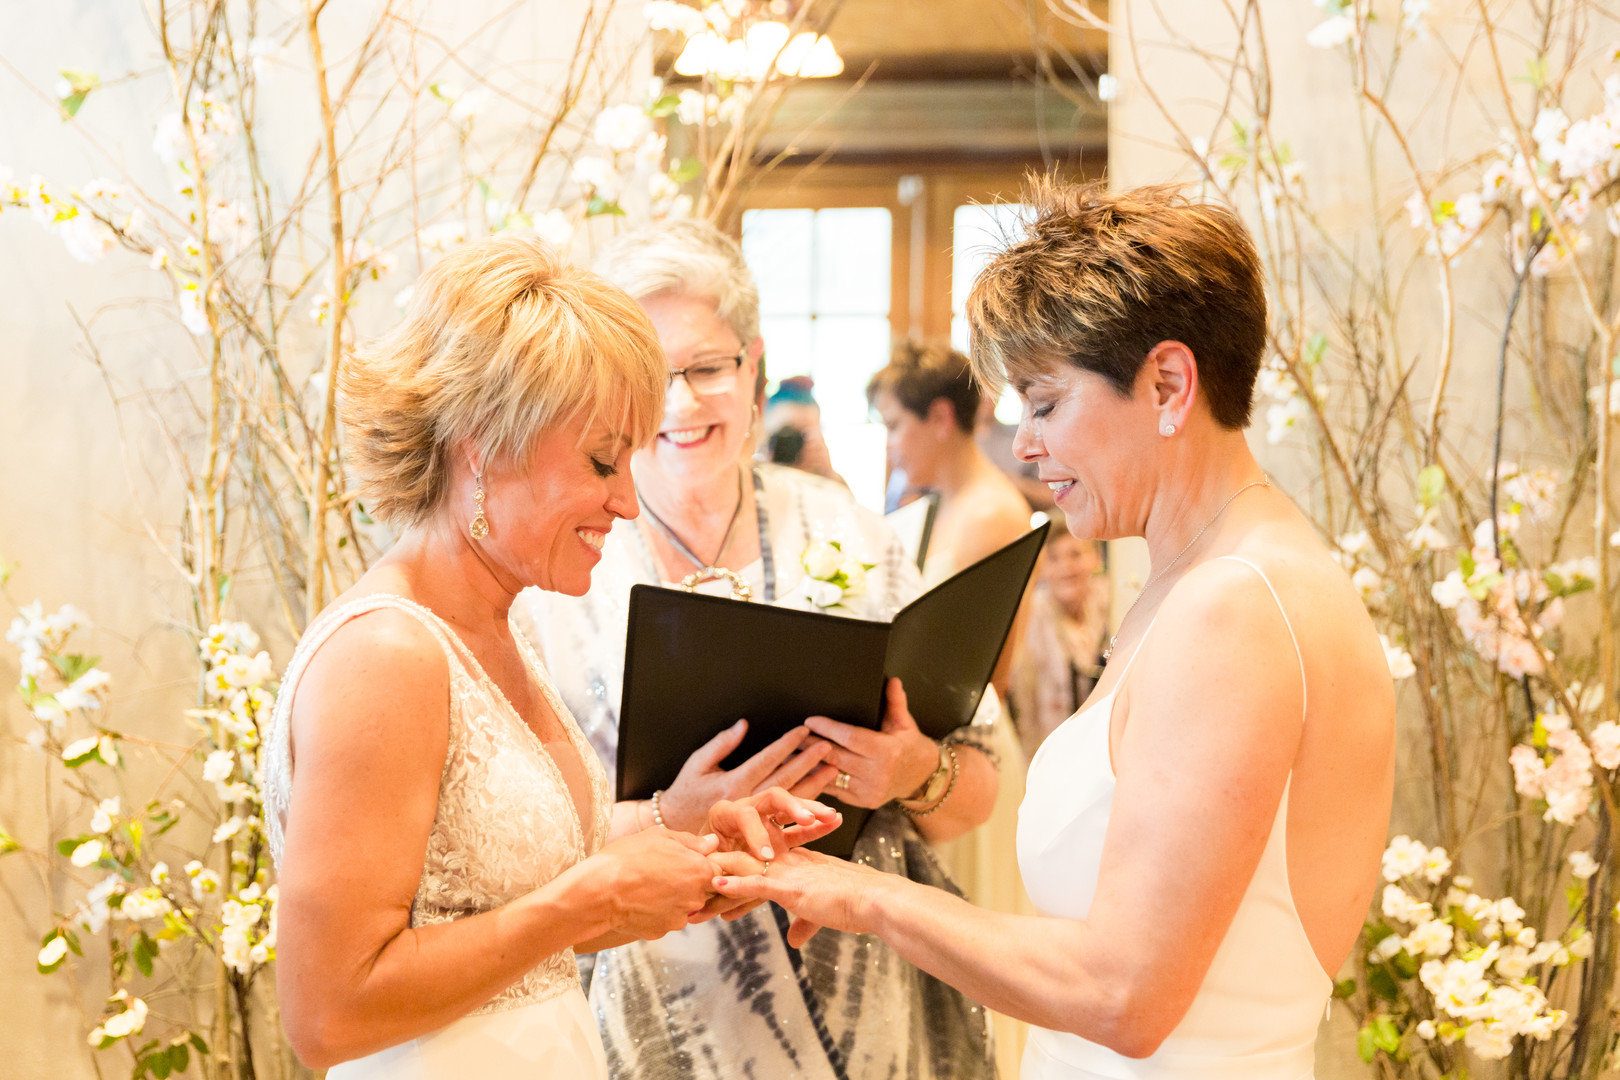 Intimate spring restaurant wedding in Newberry, South Carolina LGBTQ+ weddings two brides white dresses small wedding vows